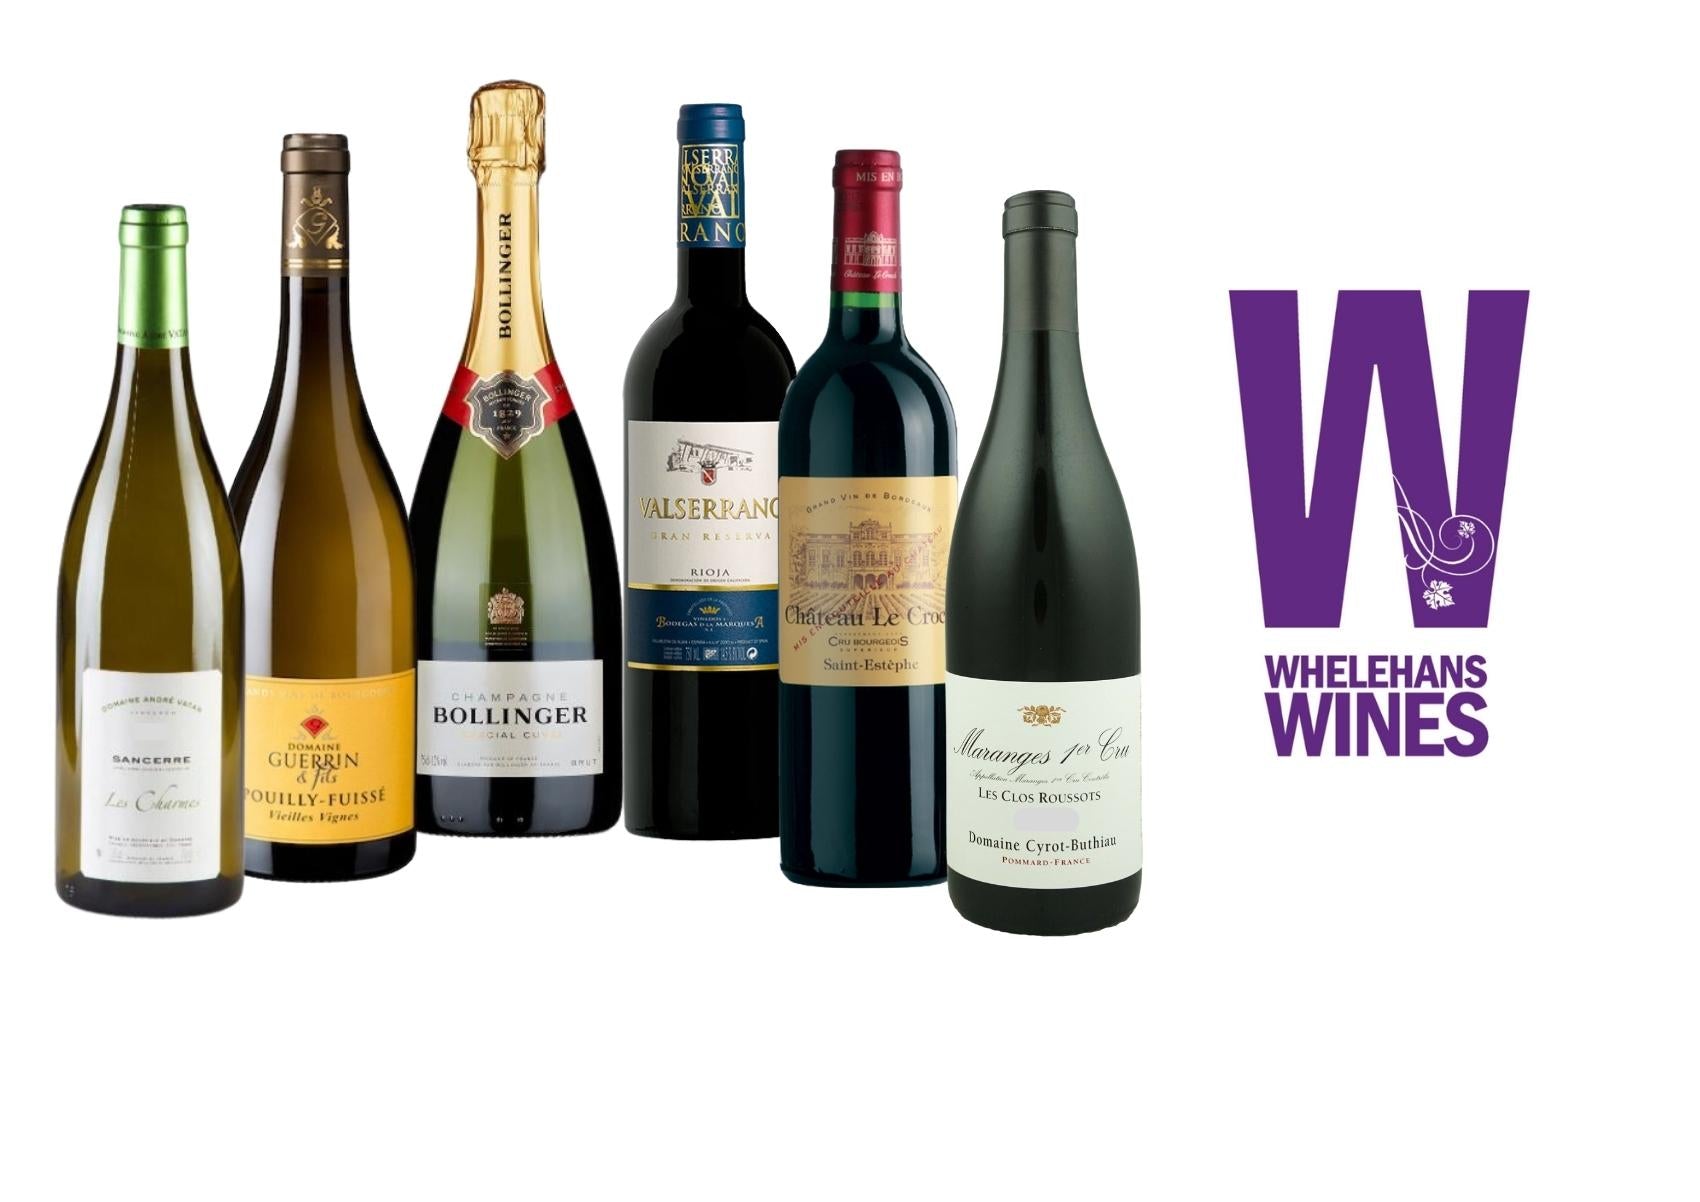 Easter Wines in Dublin: Discover Delicious Wines from Our Wine Store with Free Delivery